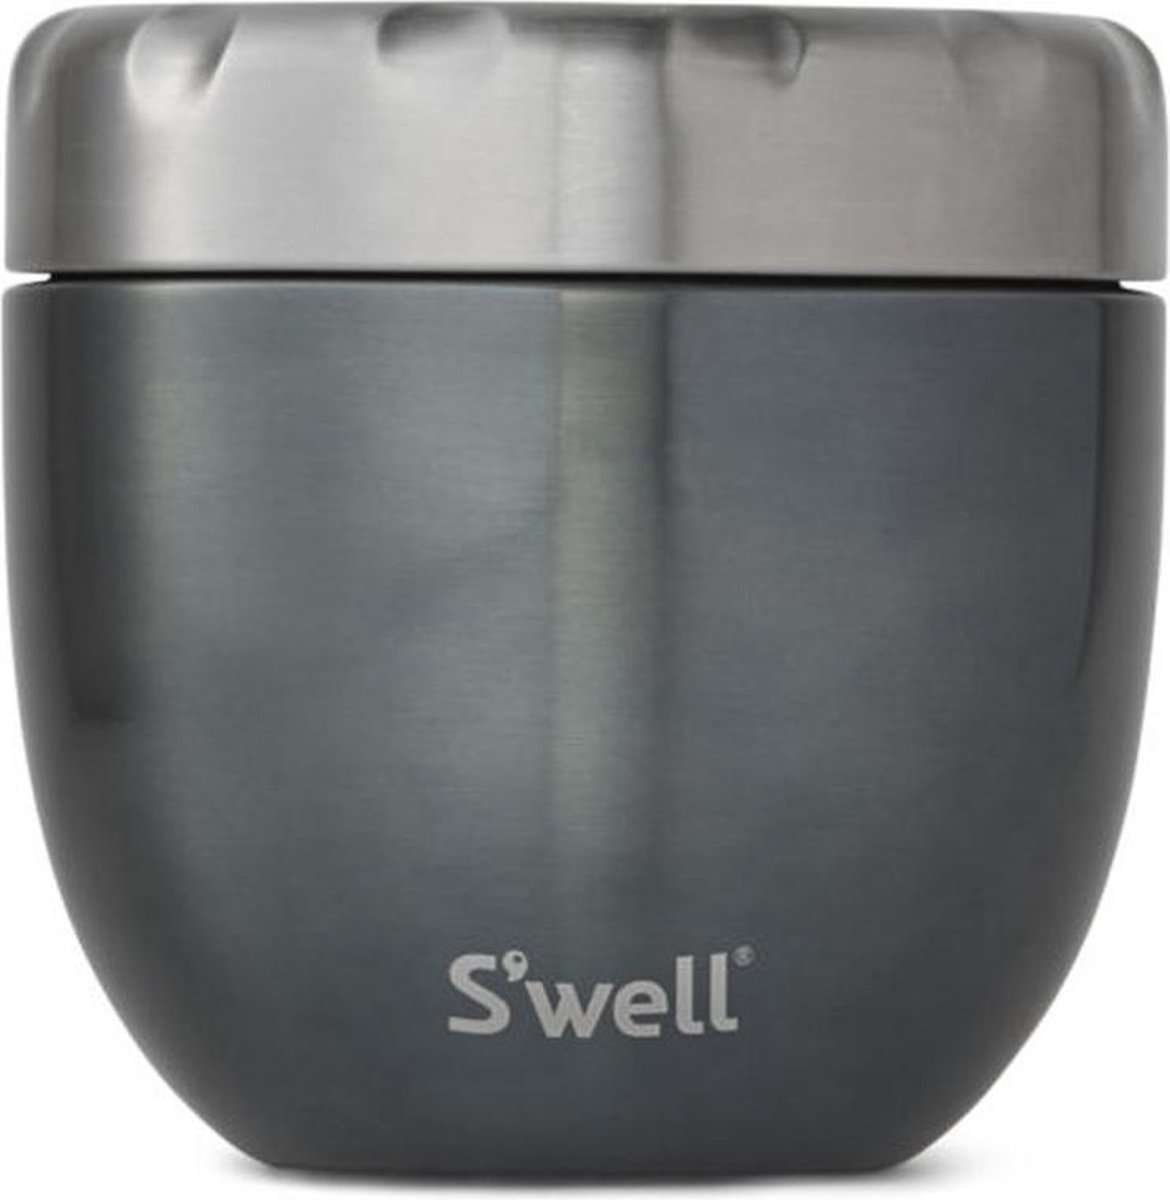 S'well Eats Blue Suede Foodbowl 635 ml